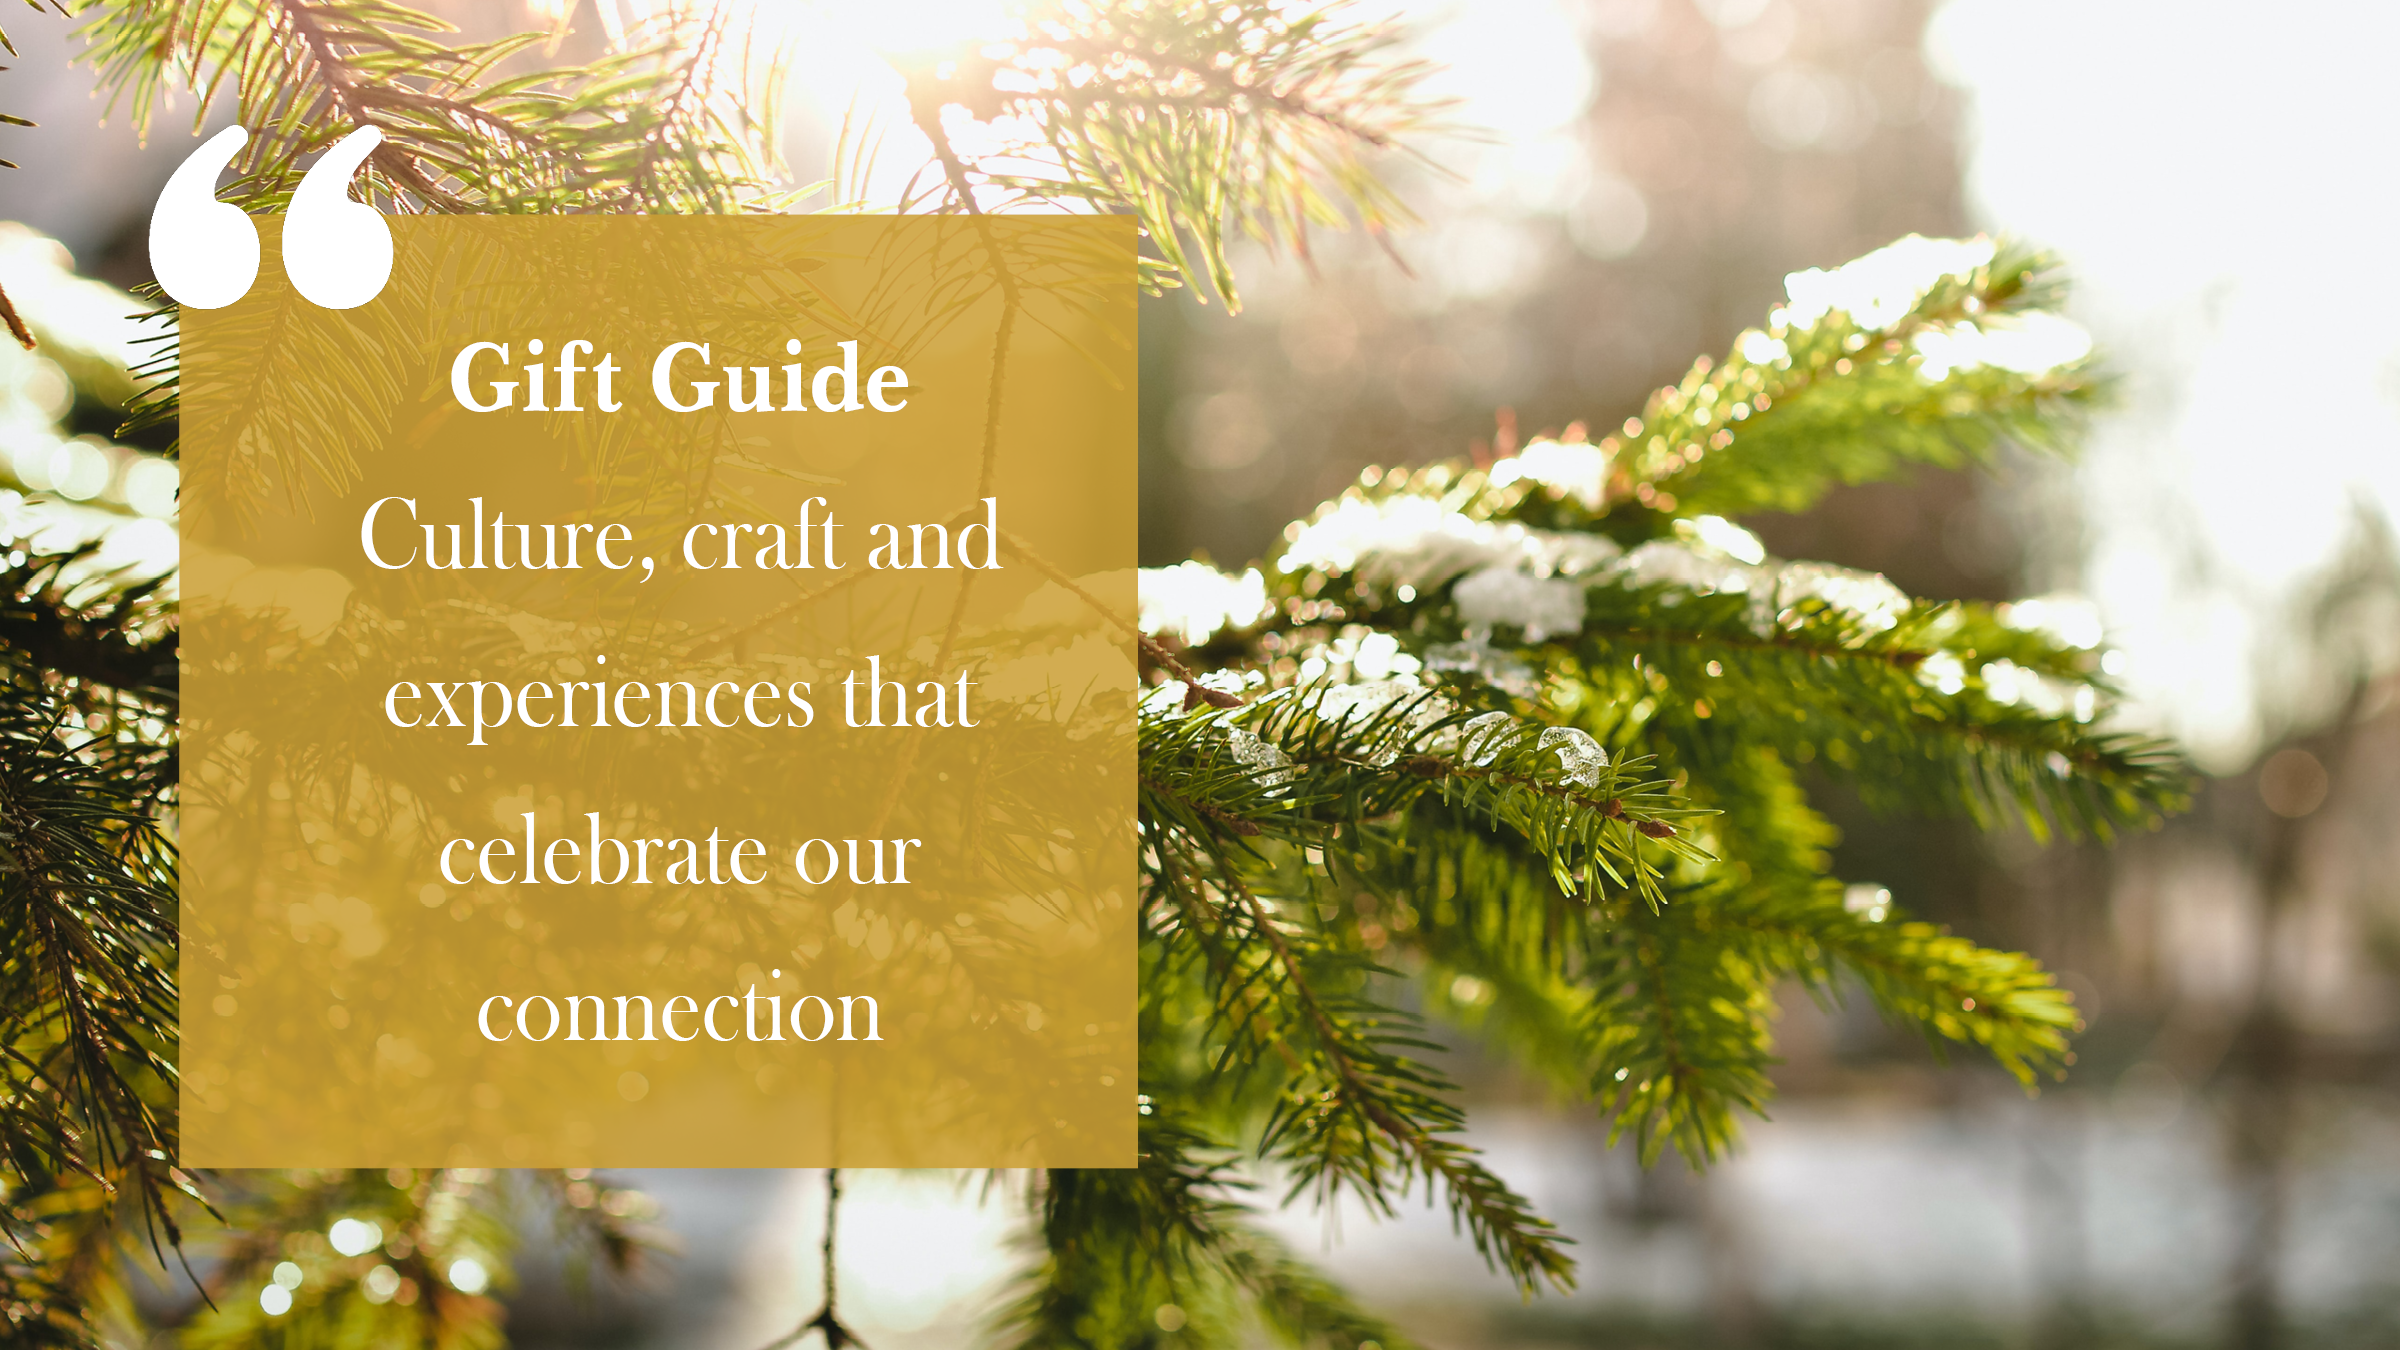 Cultivating Connection at Christmas